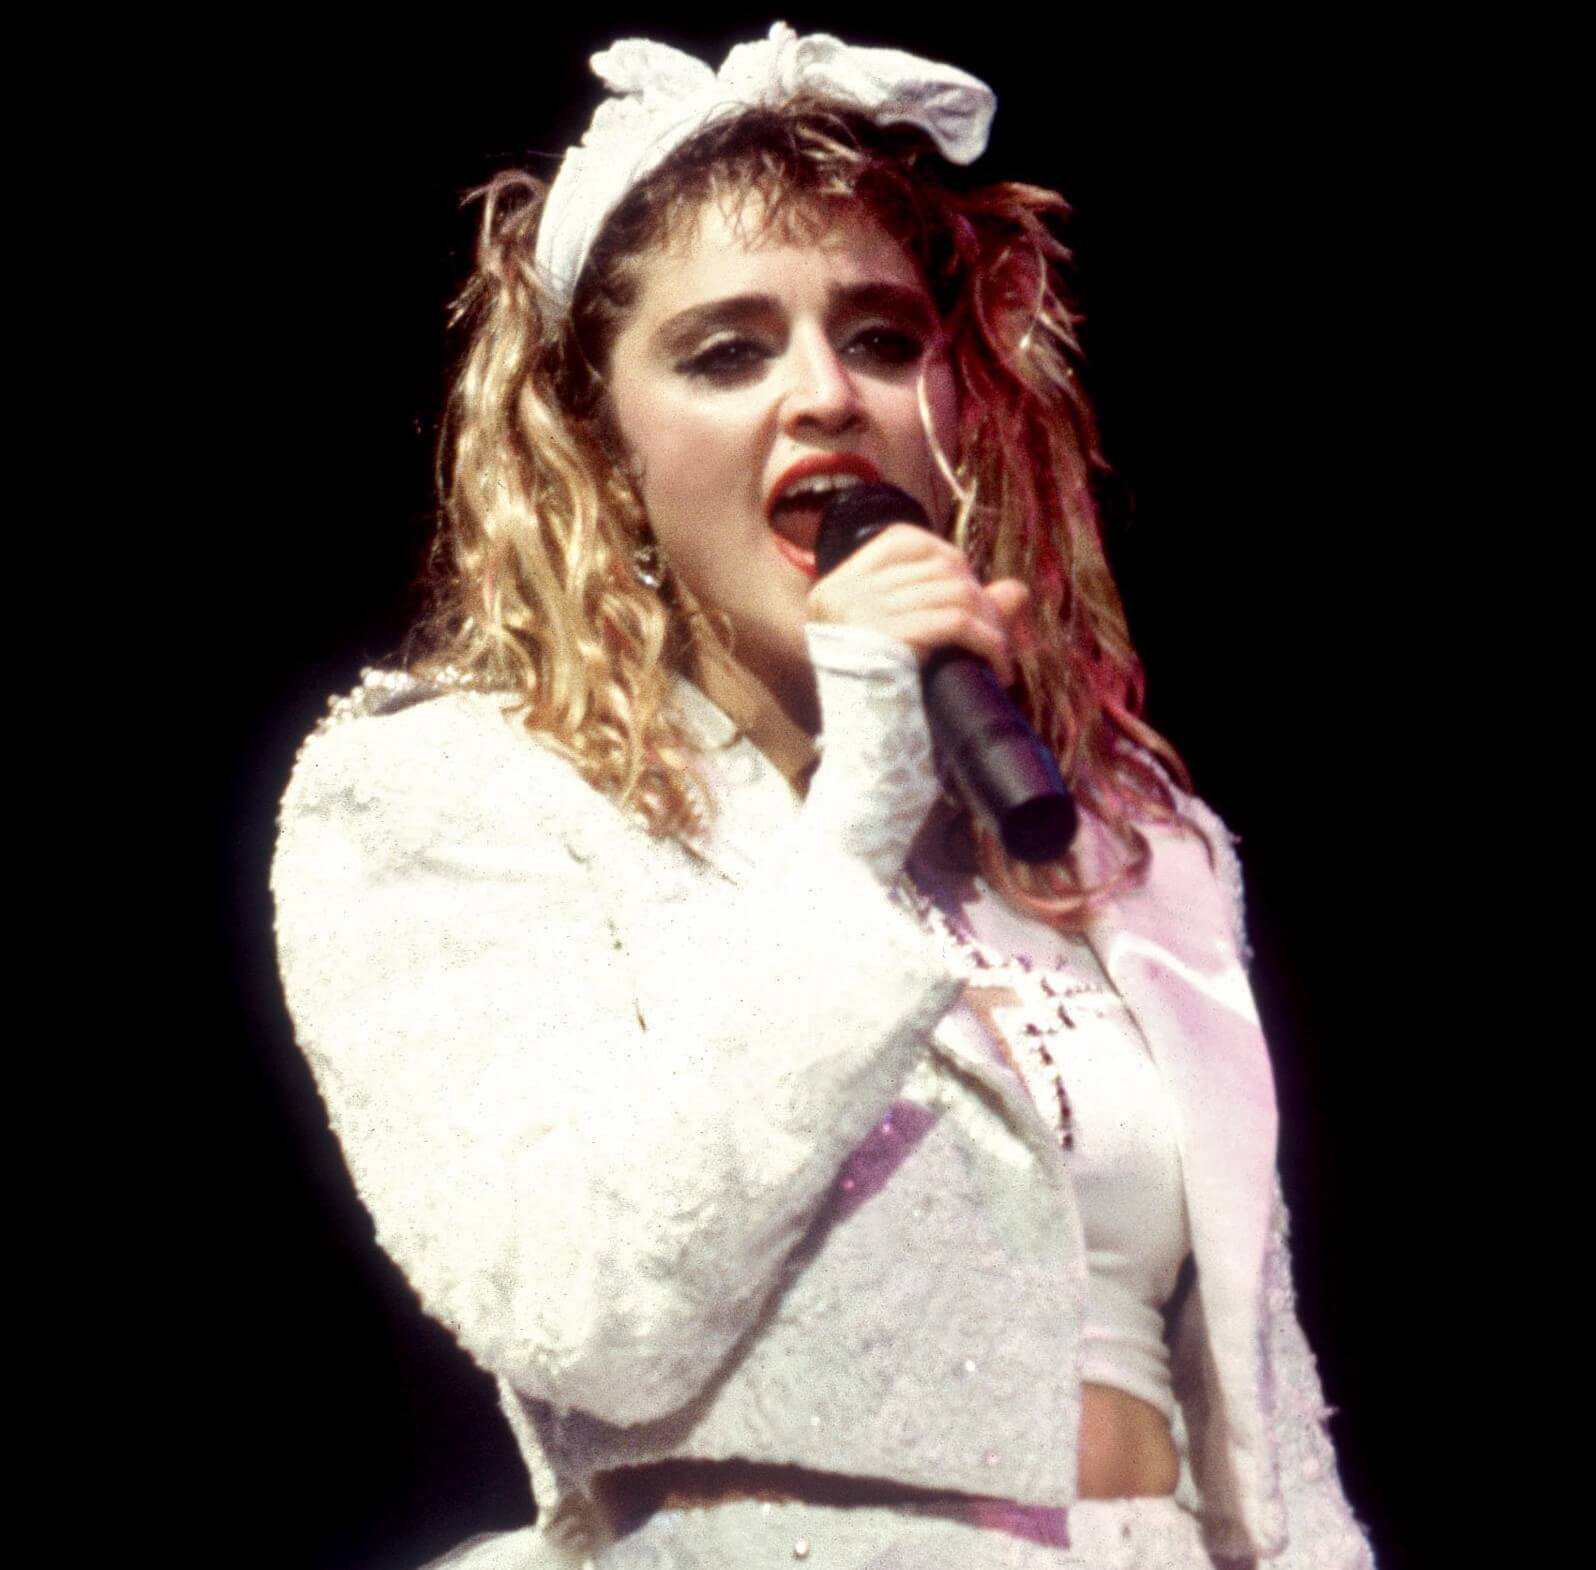 "Material Girl" singer Madonna with a microphone